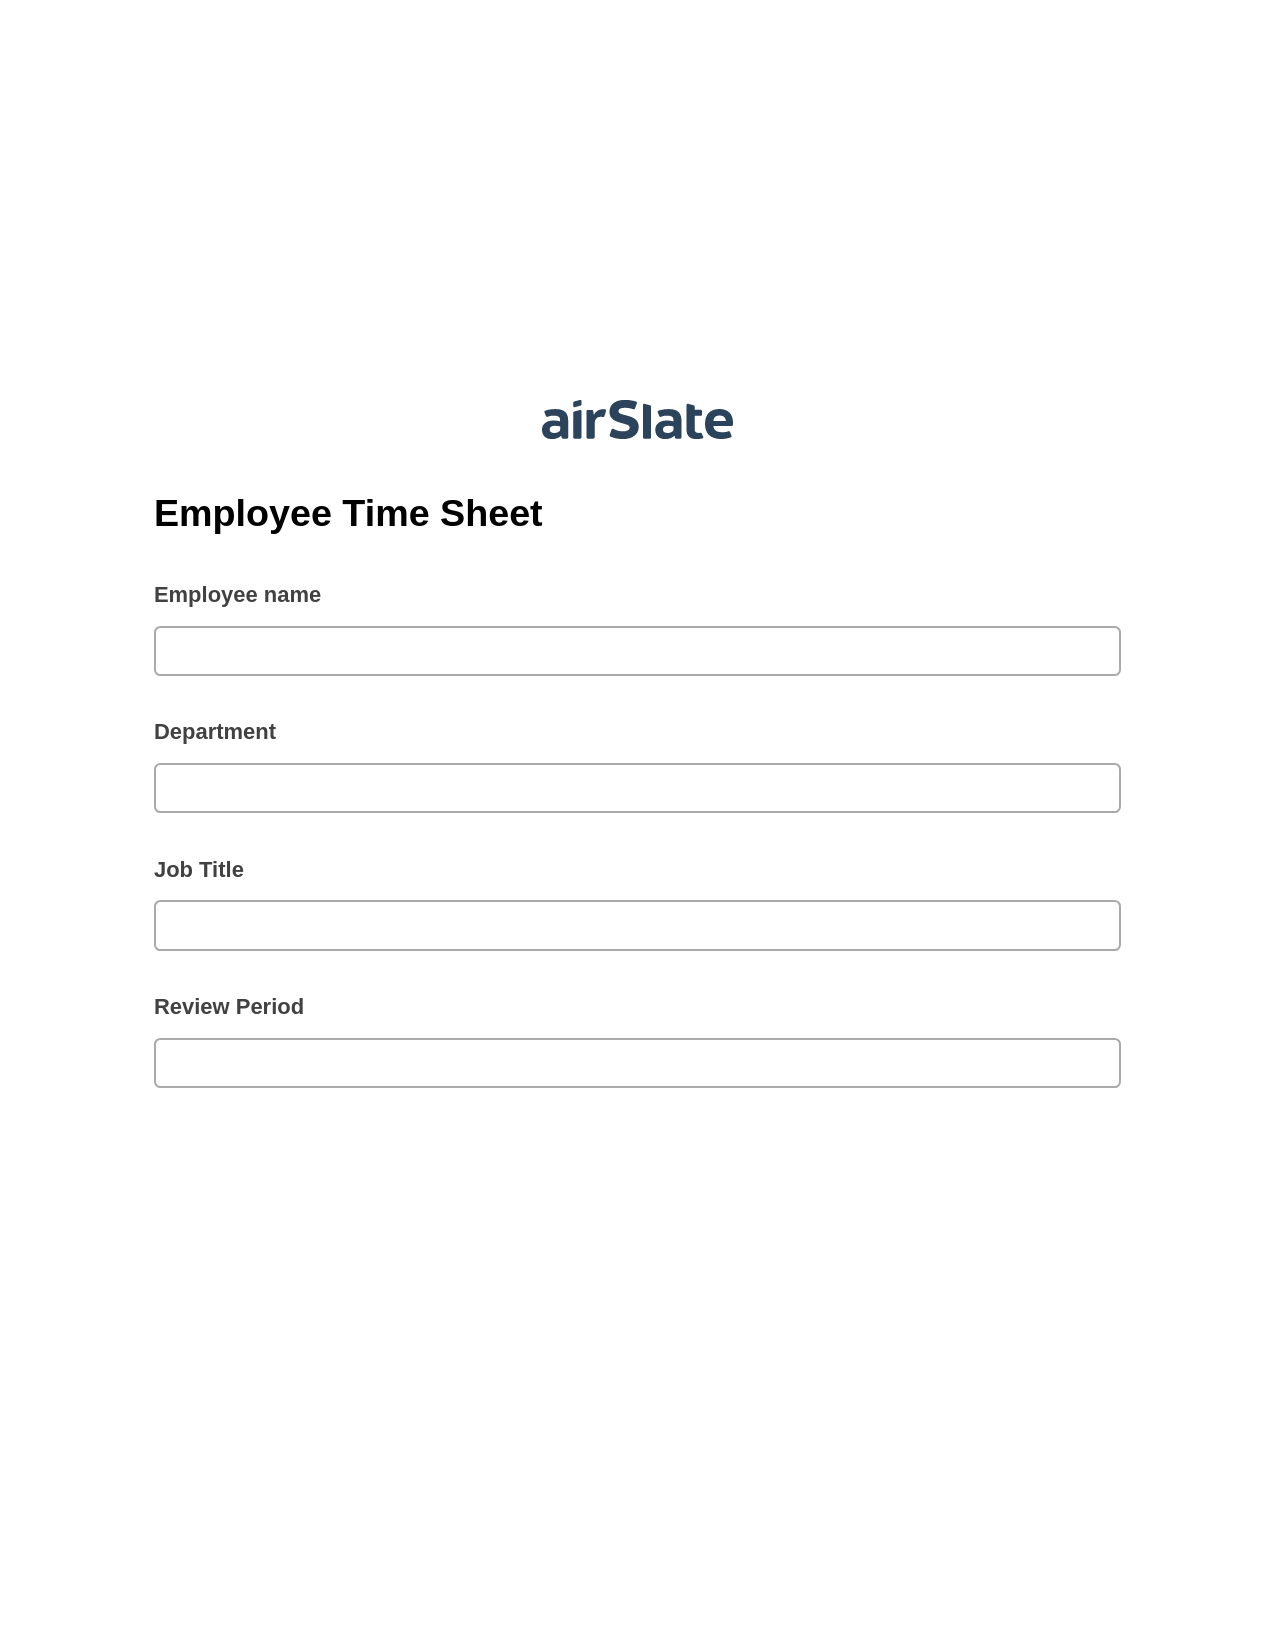 Employee Time Sheet Prefill from NetSuite records, Update Audit Trail Bot, Archive to Dropbox Bot